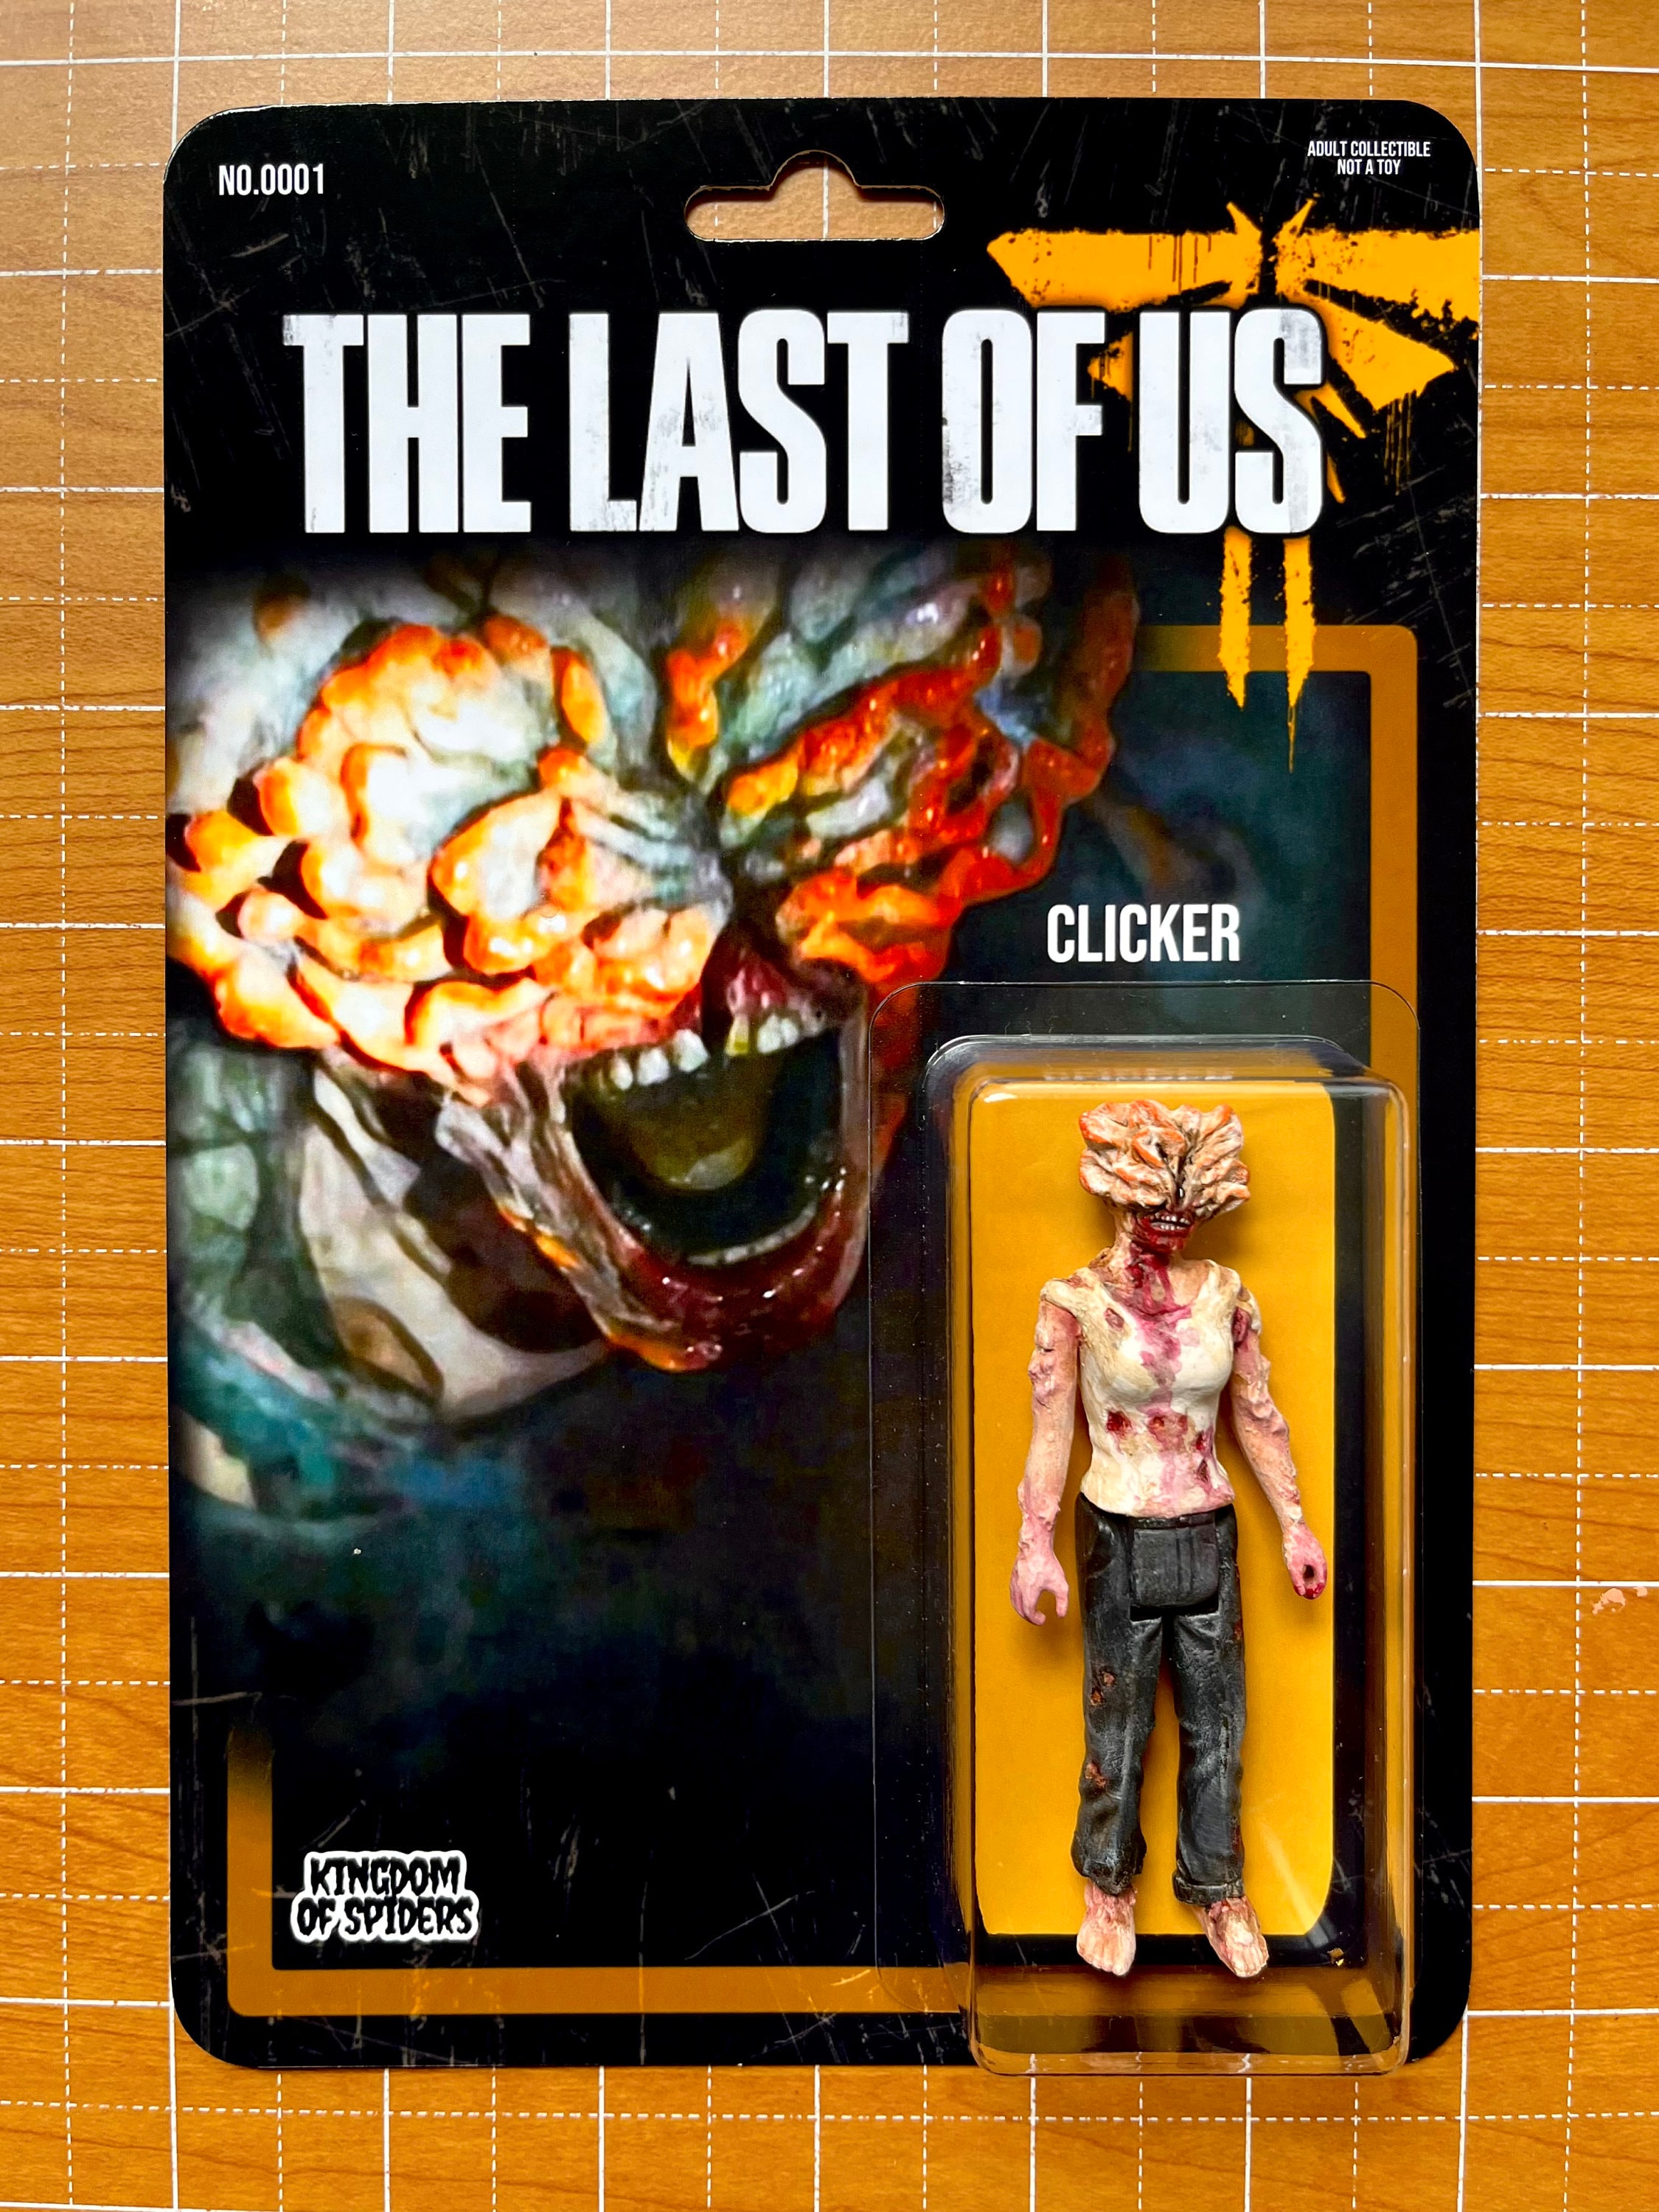 What is a clicker in The Last of Us?